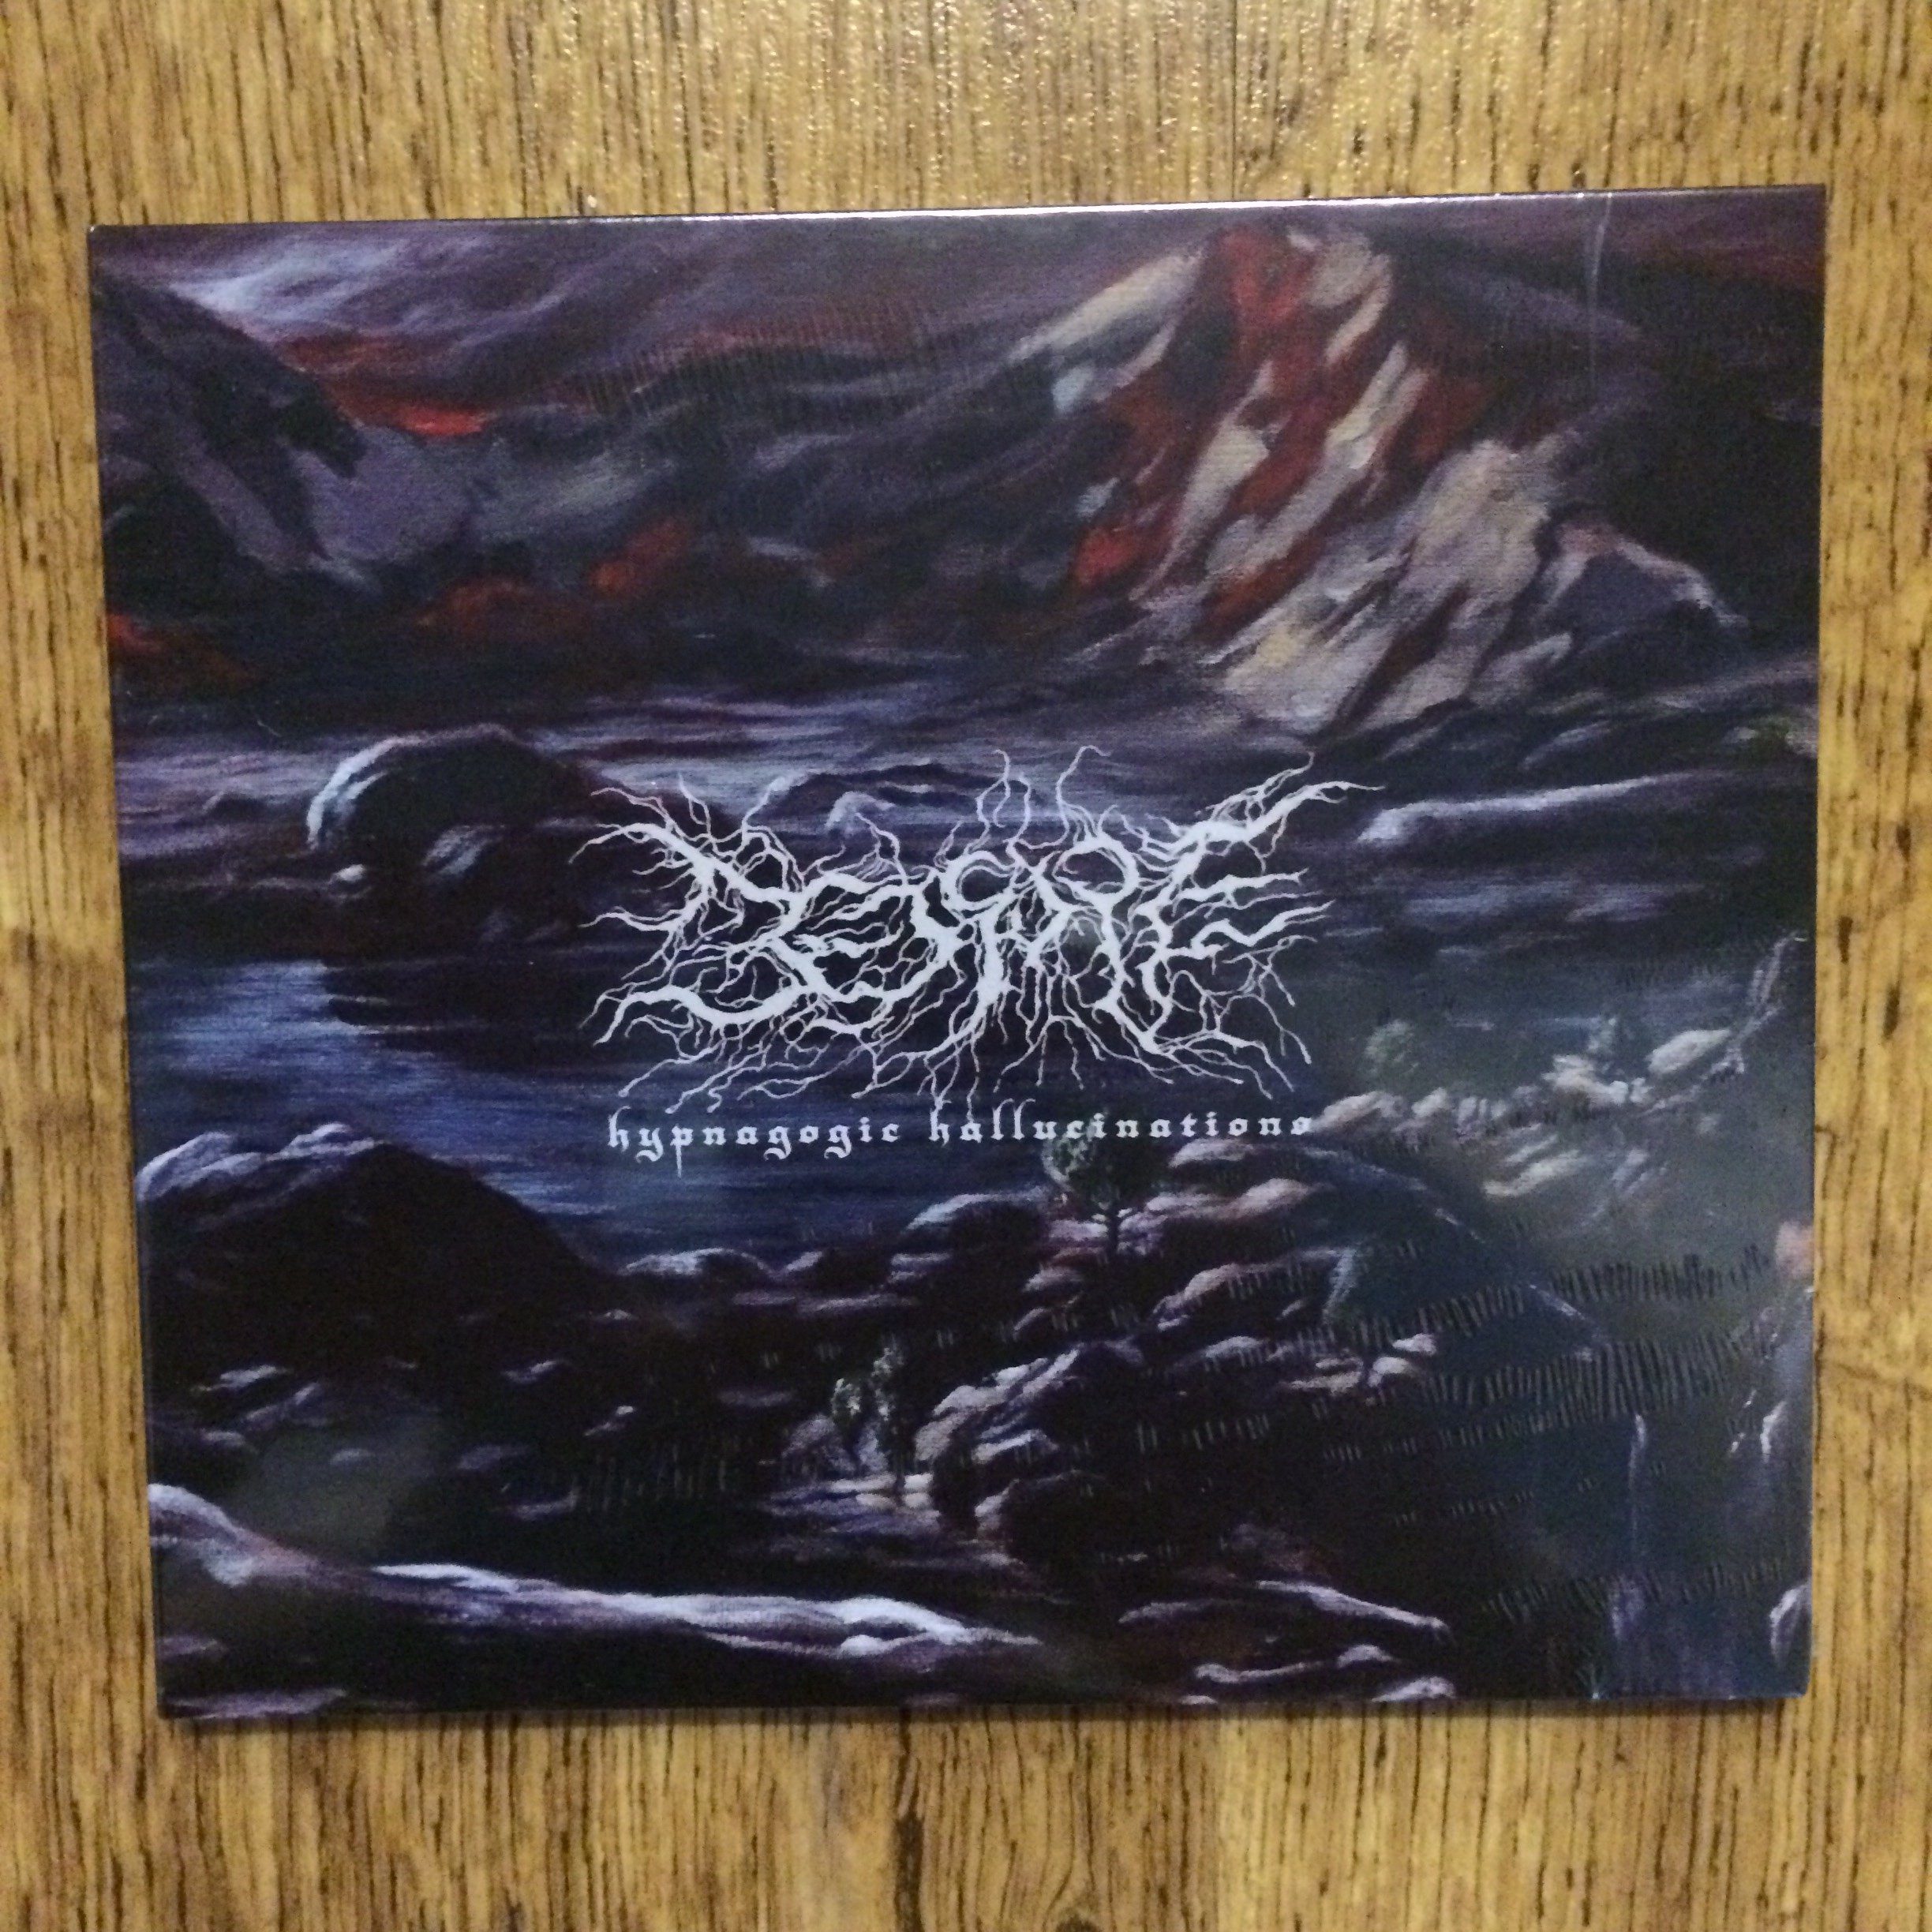 Photo of the Bedsore - "Hypnagogic Hallucinations" CD